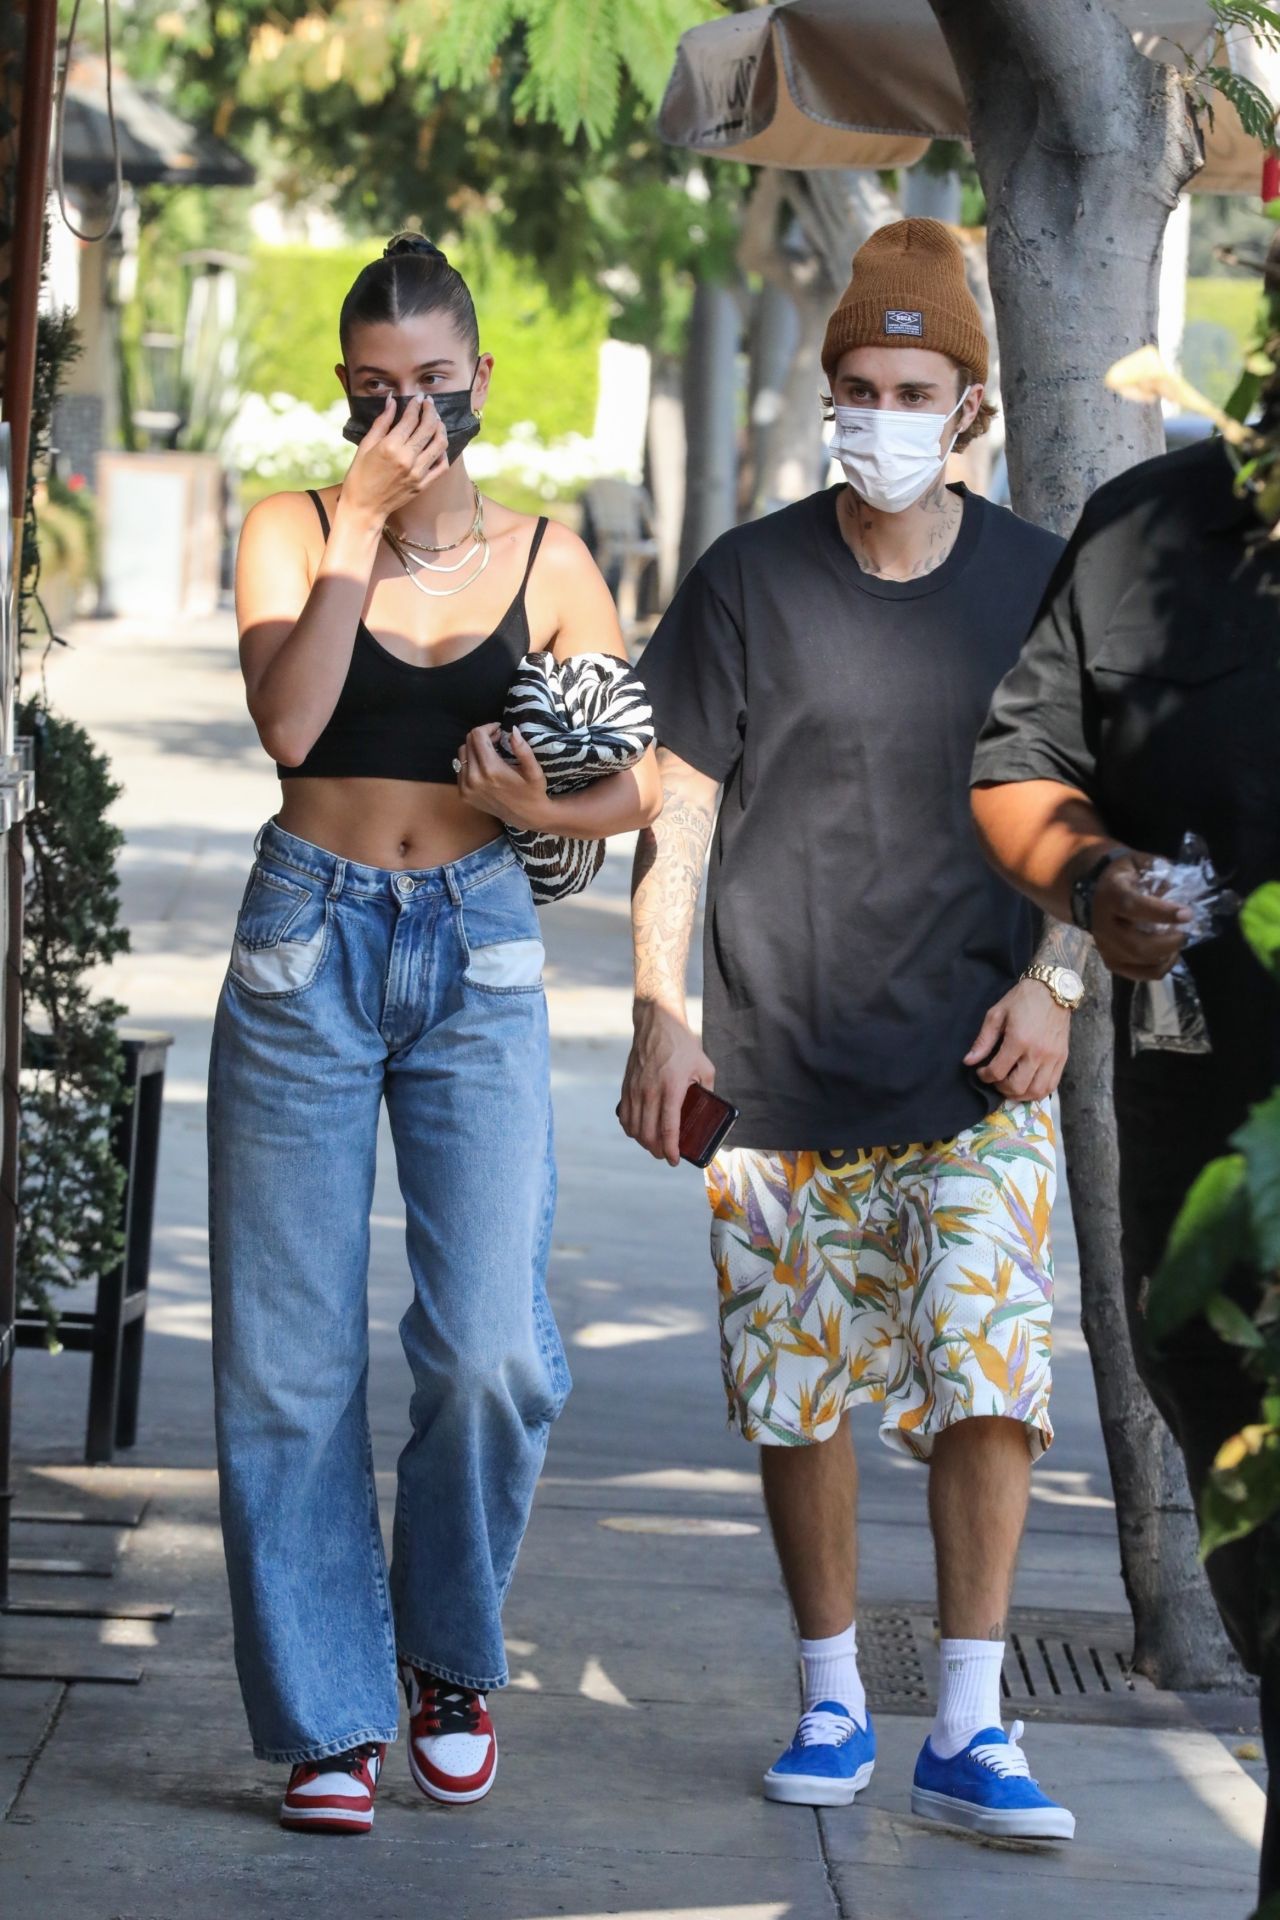 hailey-bieber-and-justin-bieber-at-il-pastaio-in-beverly-hill-10-06-2020-1.jpg